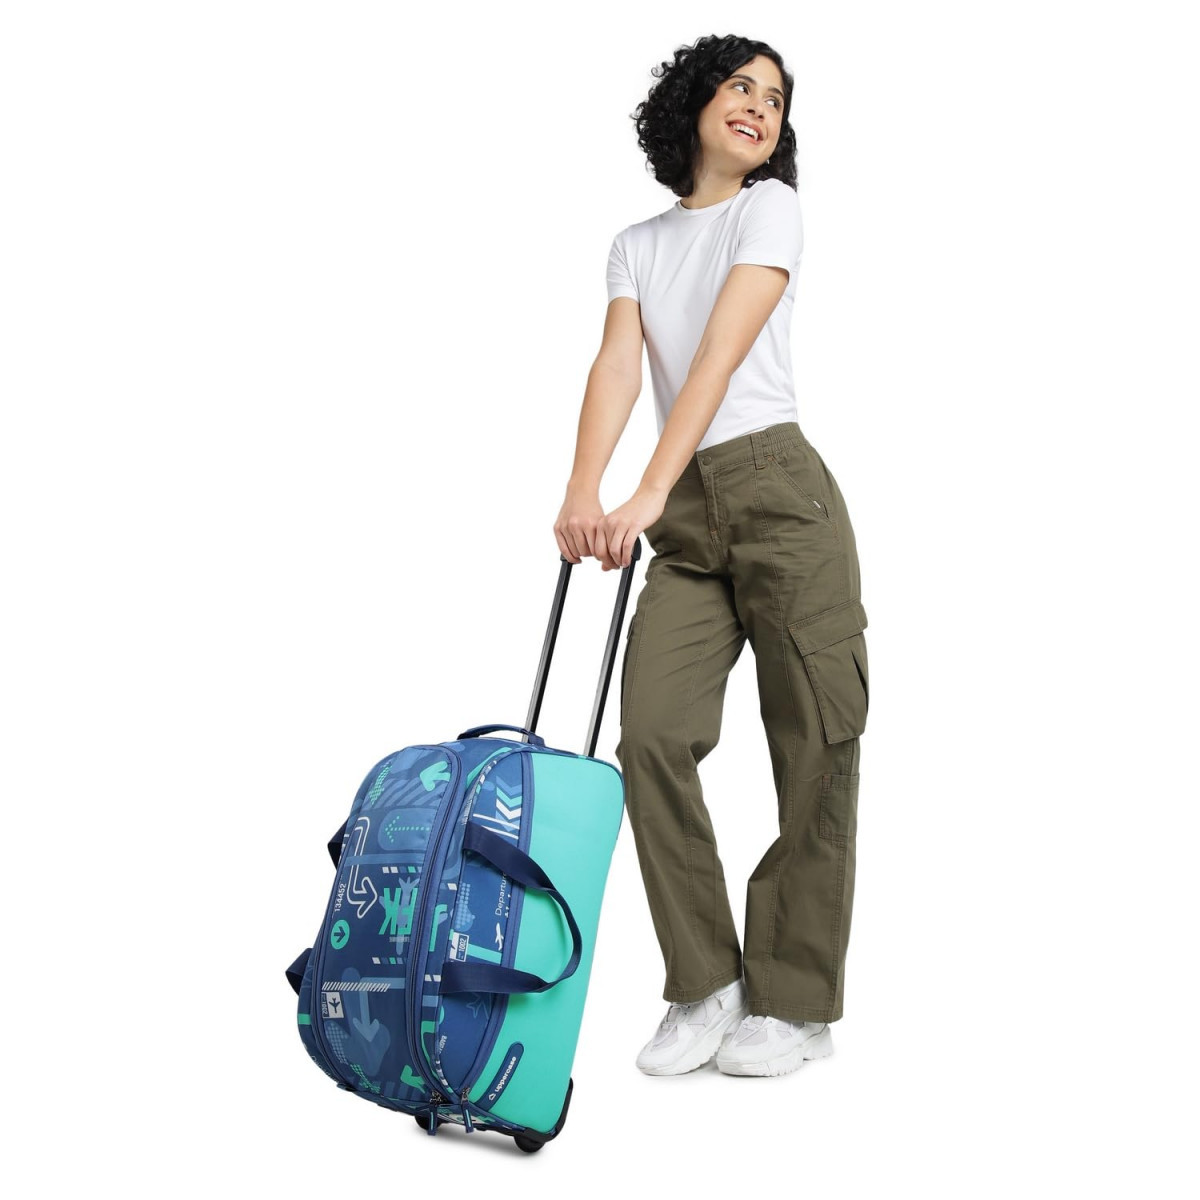 uppercase Polyester Jfk 52 Duffle Trolley BagDust Resistant Travel BagSpacious Main CompartmentSmooth WheelsQuick Front Pocket AccessDuffle Bag For Women  Men1500 Days Warranty Denim Blue